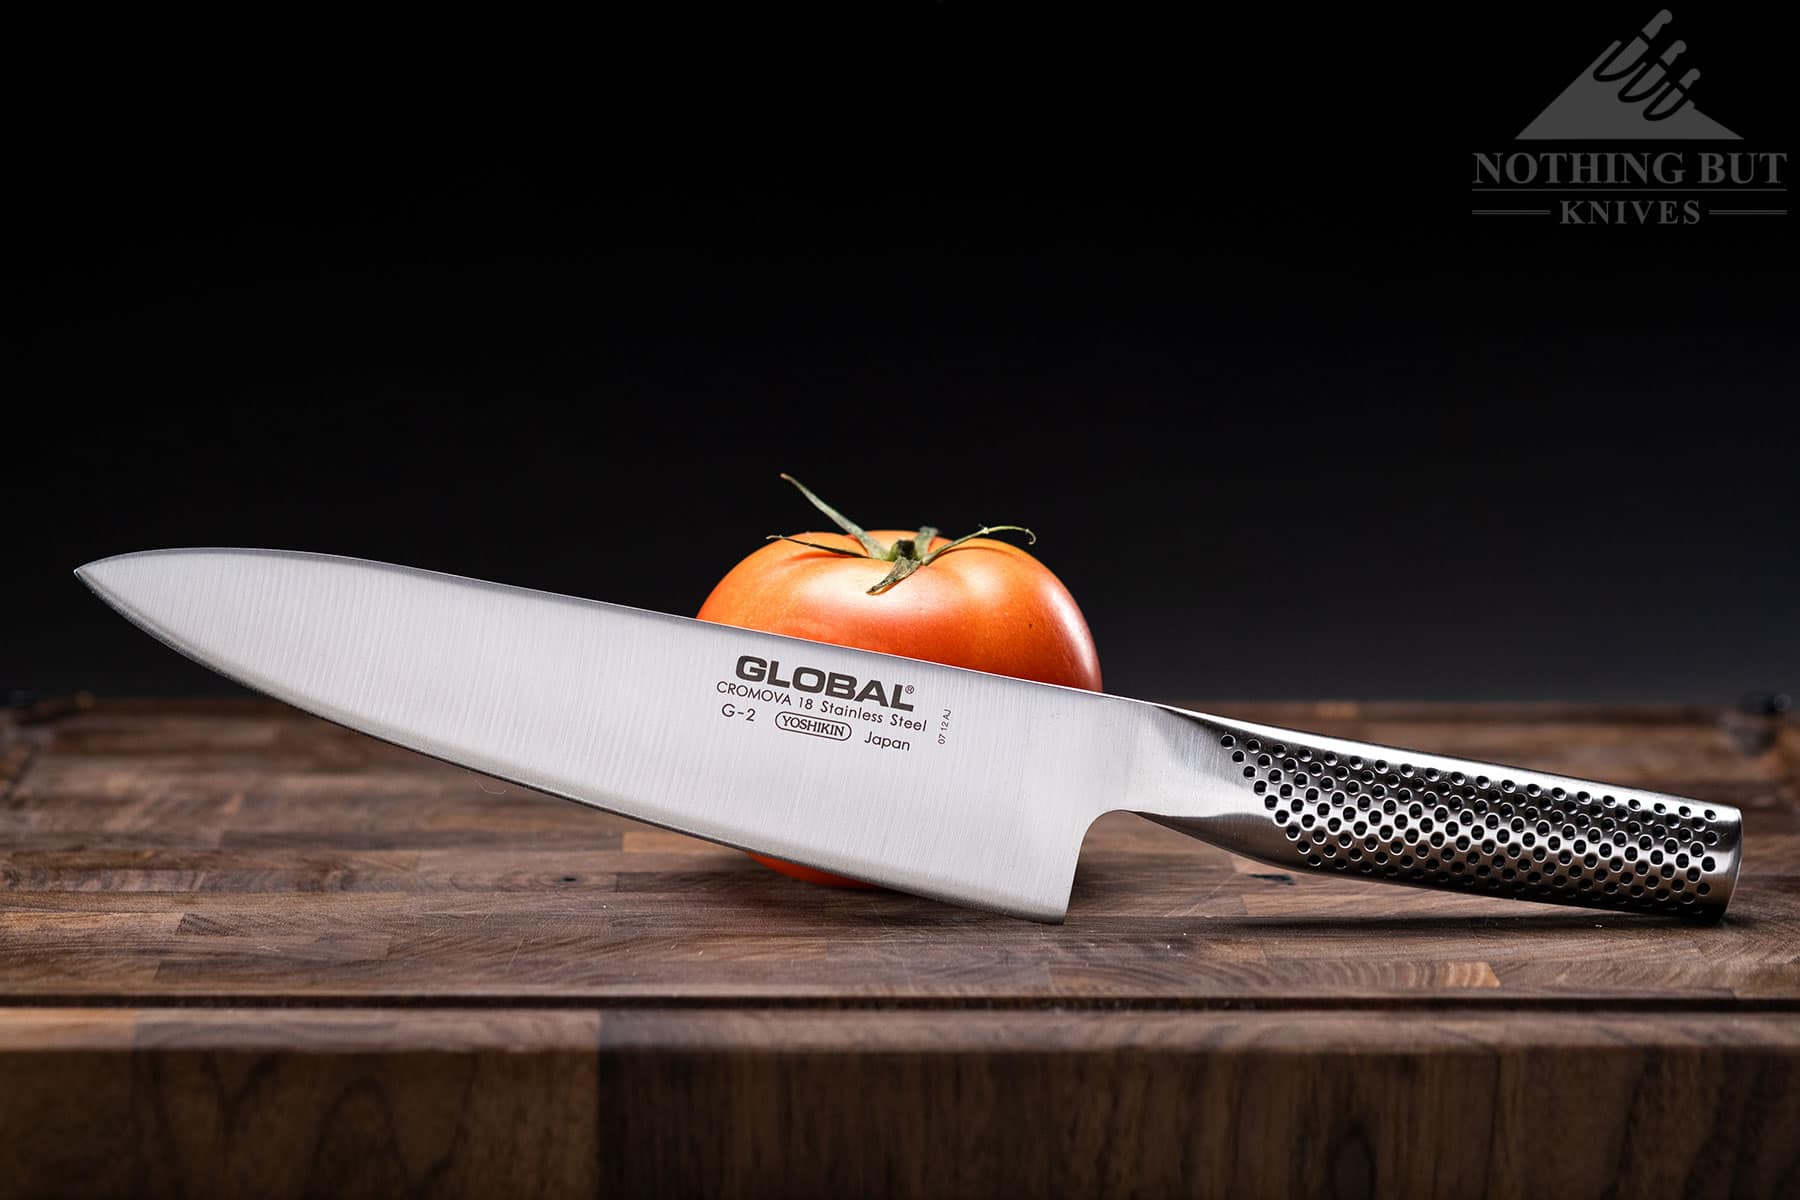 The Global G-2 8 inch chef knife is lightweight and ergonomic. It offers good performance for the price. 